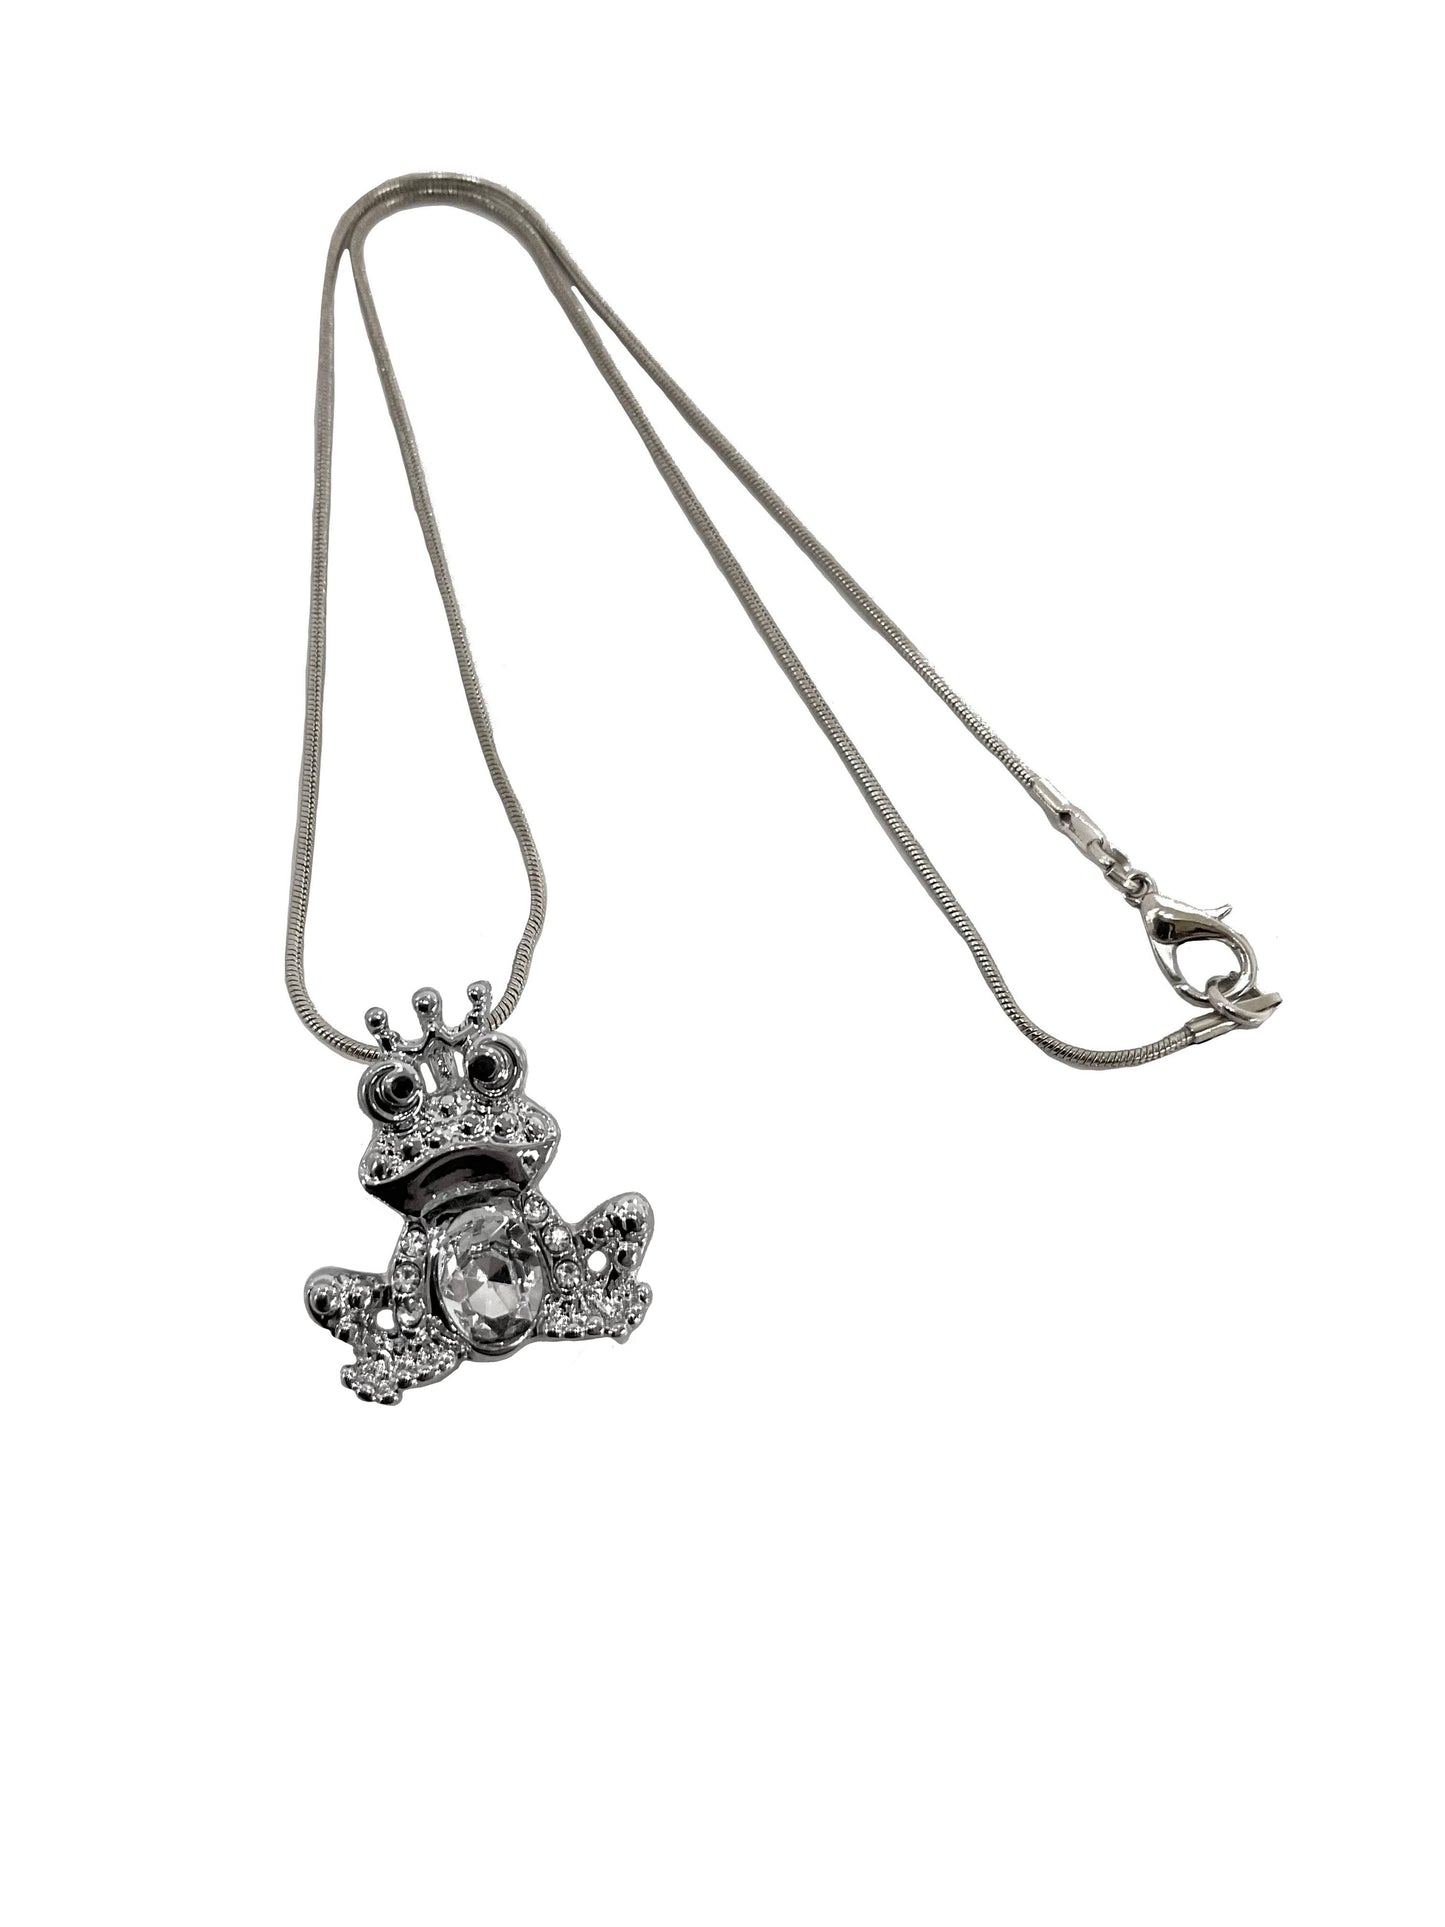 Crown Frog Necklace #27-3113